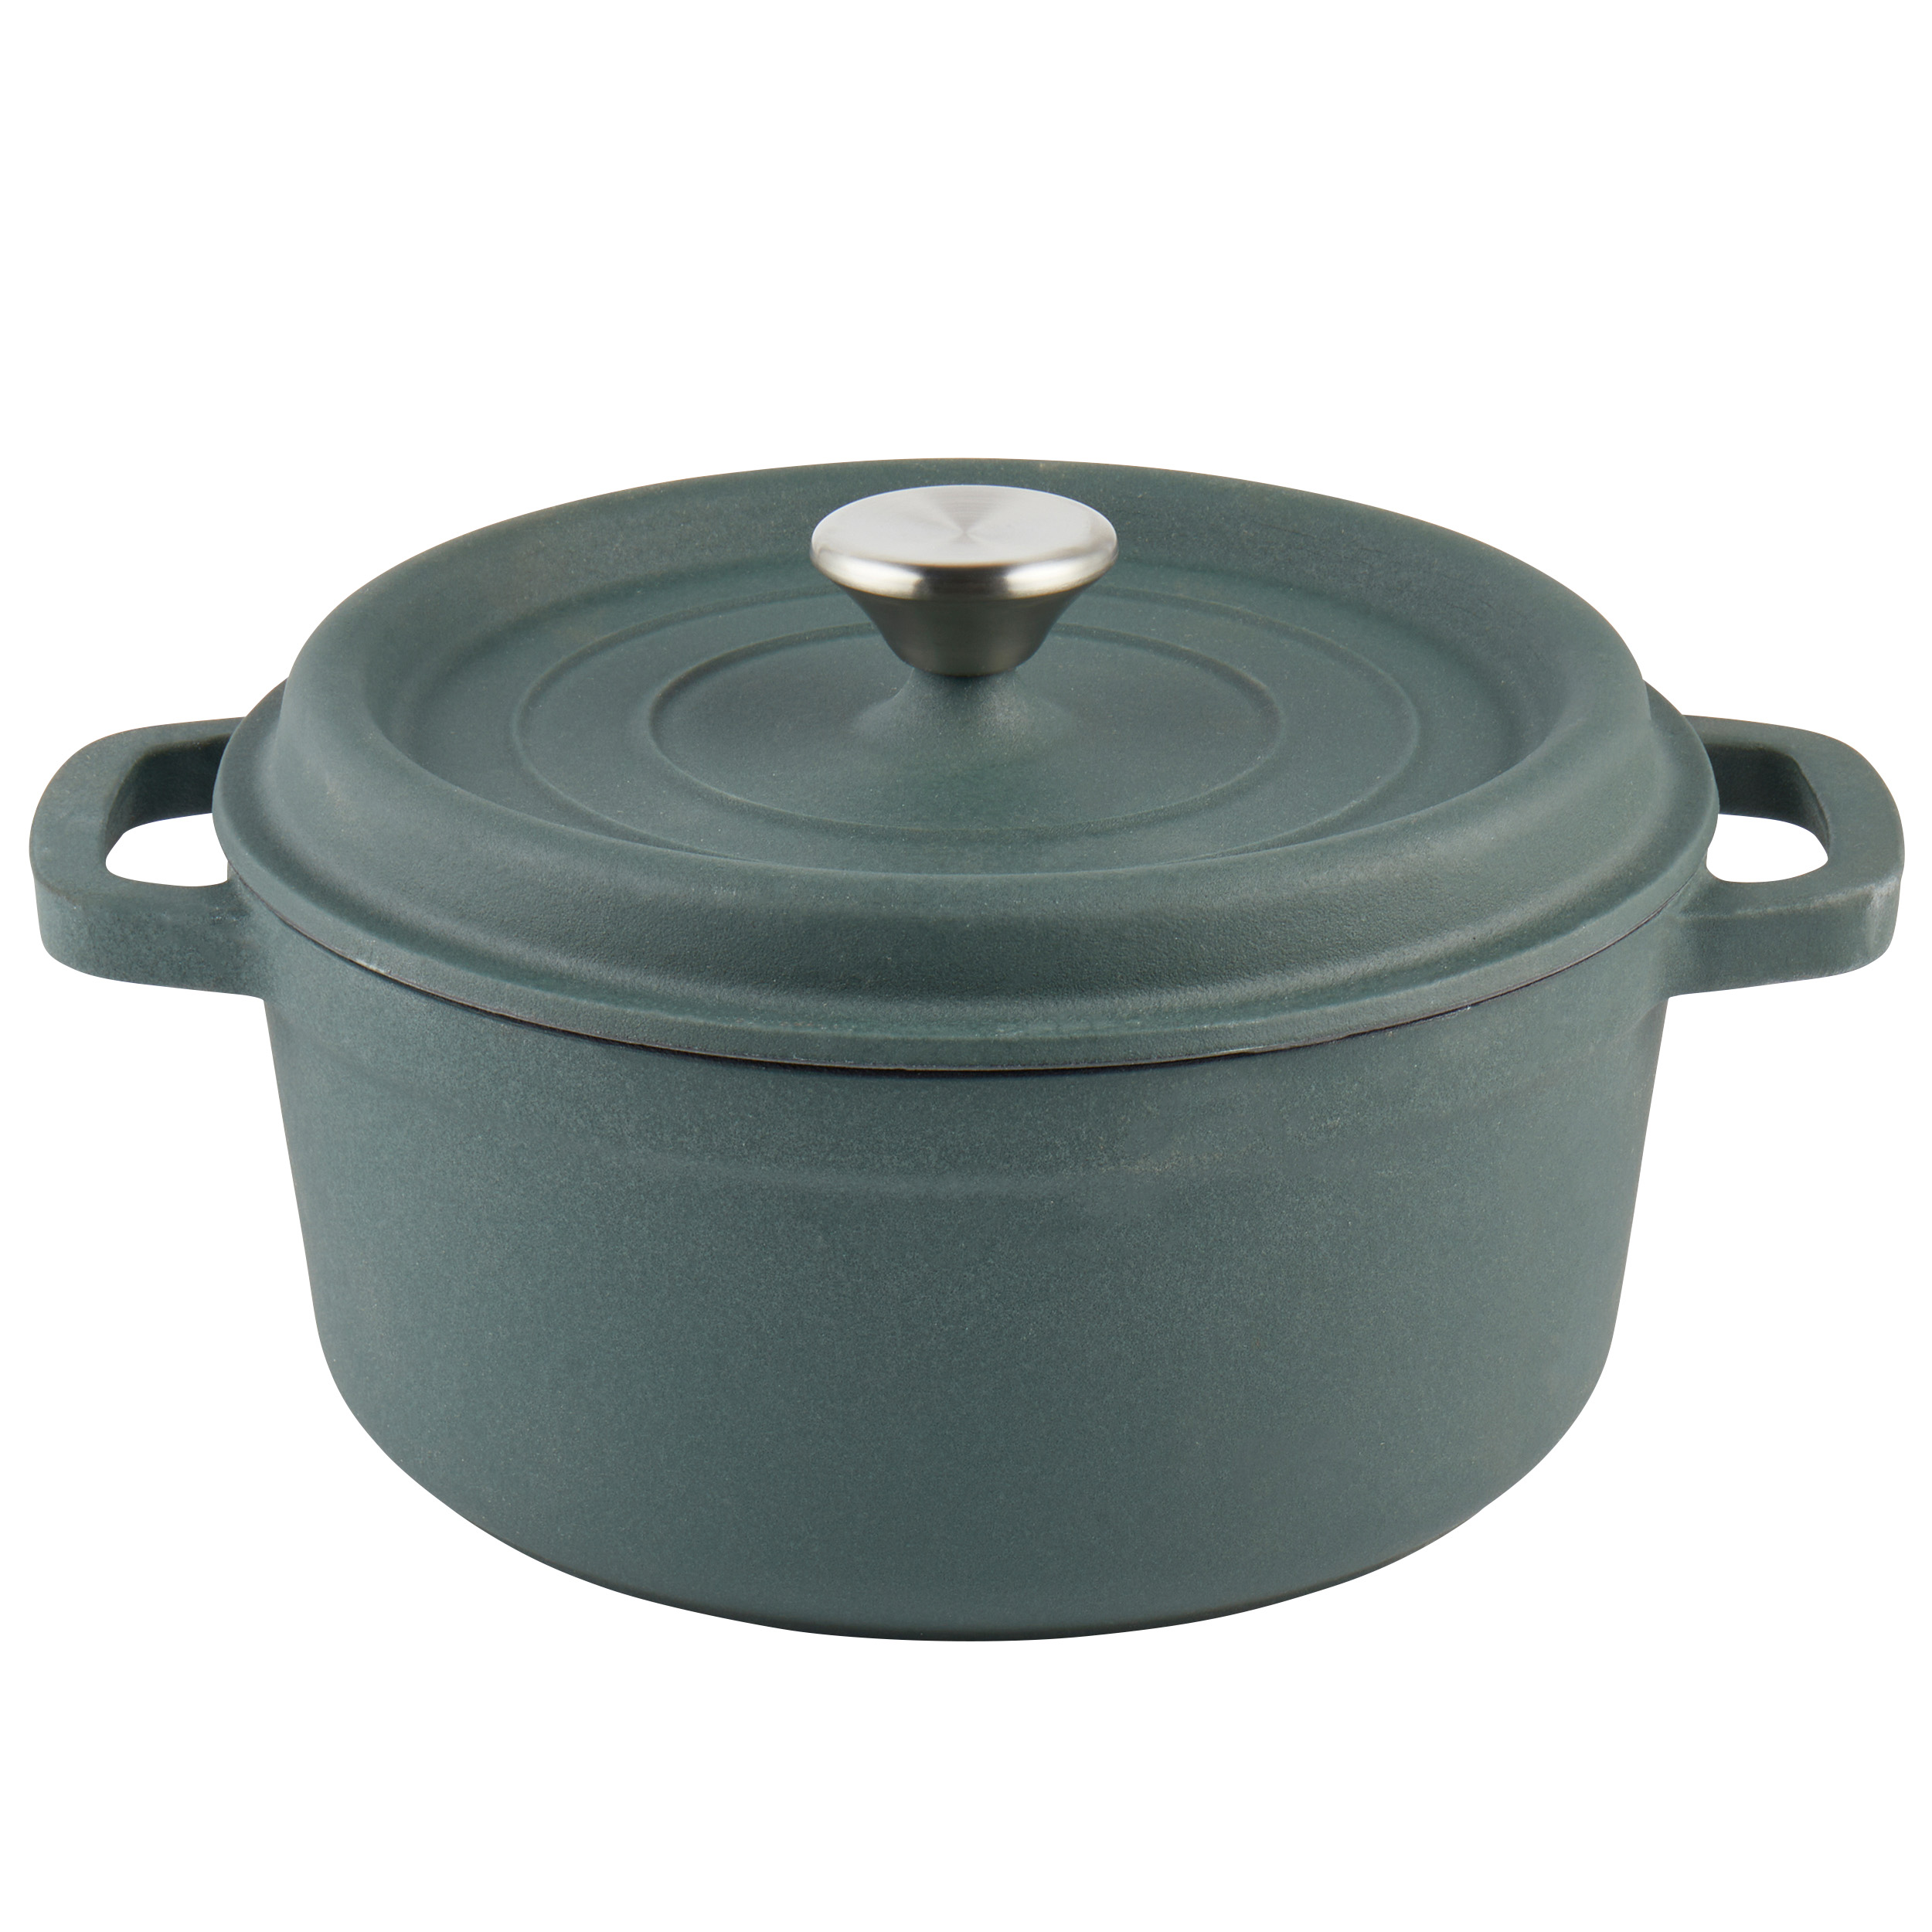 Salter Heritage Cast Iron Casserole Dish with Lid